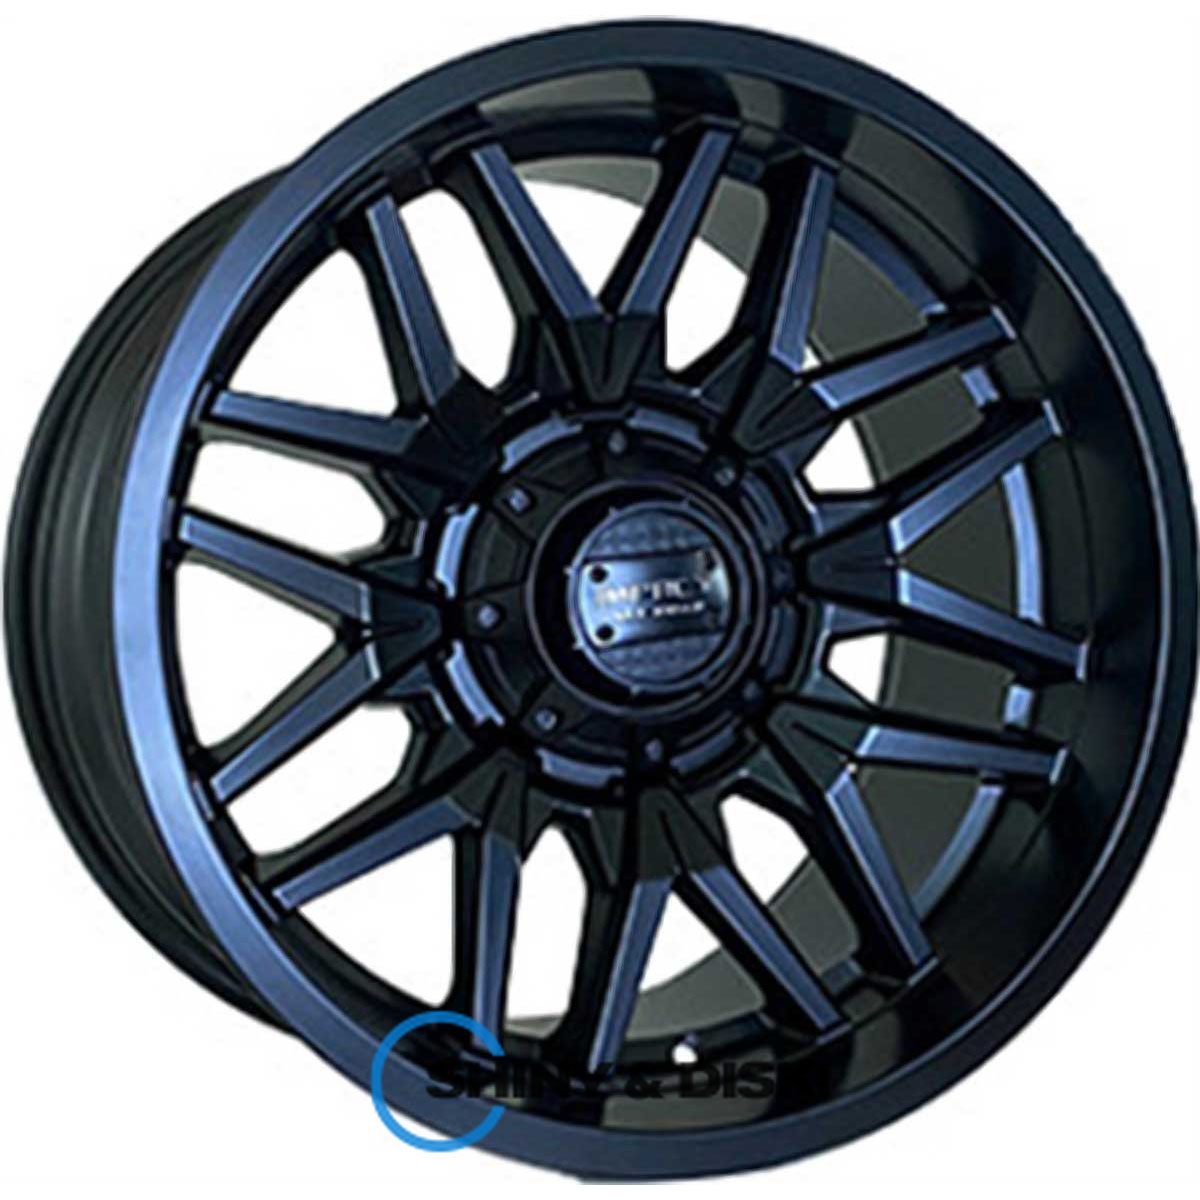 off road wheels ow1592 mb